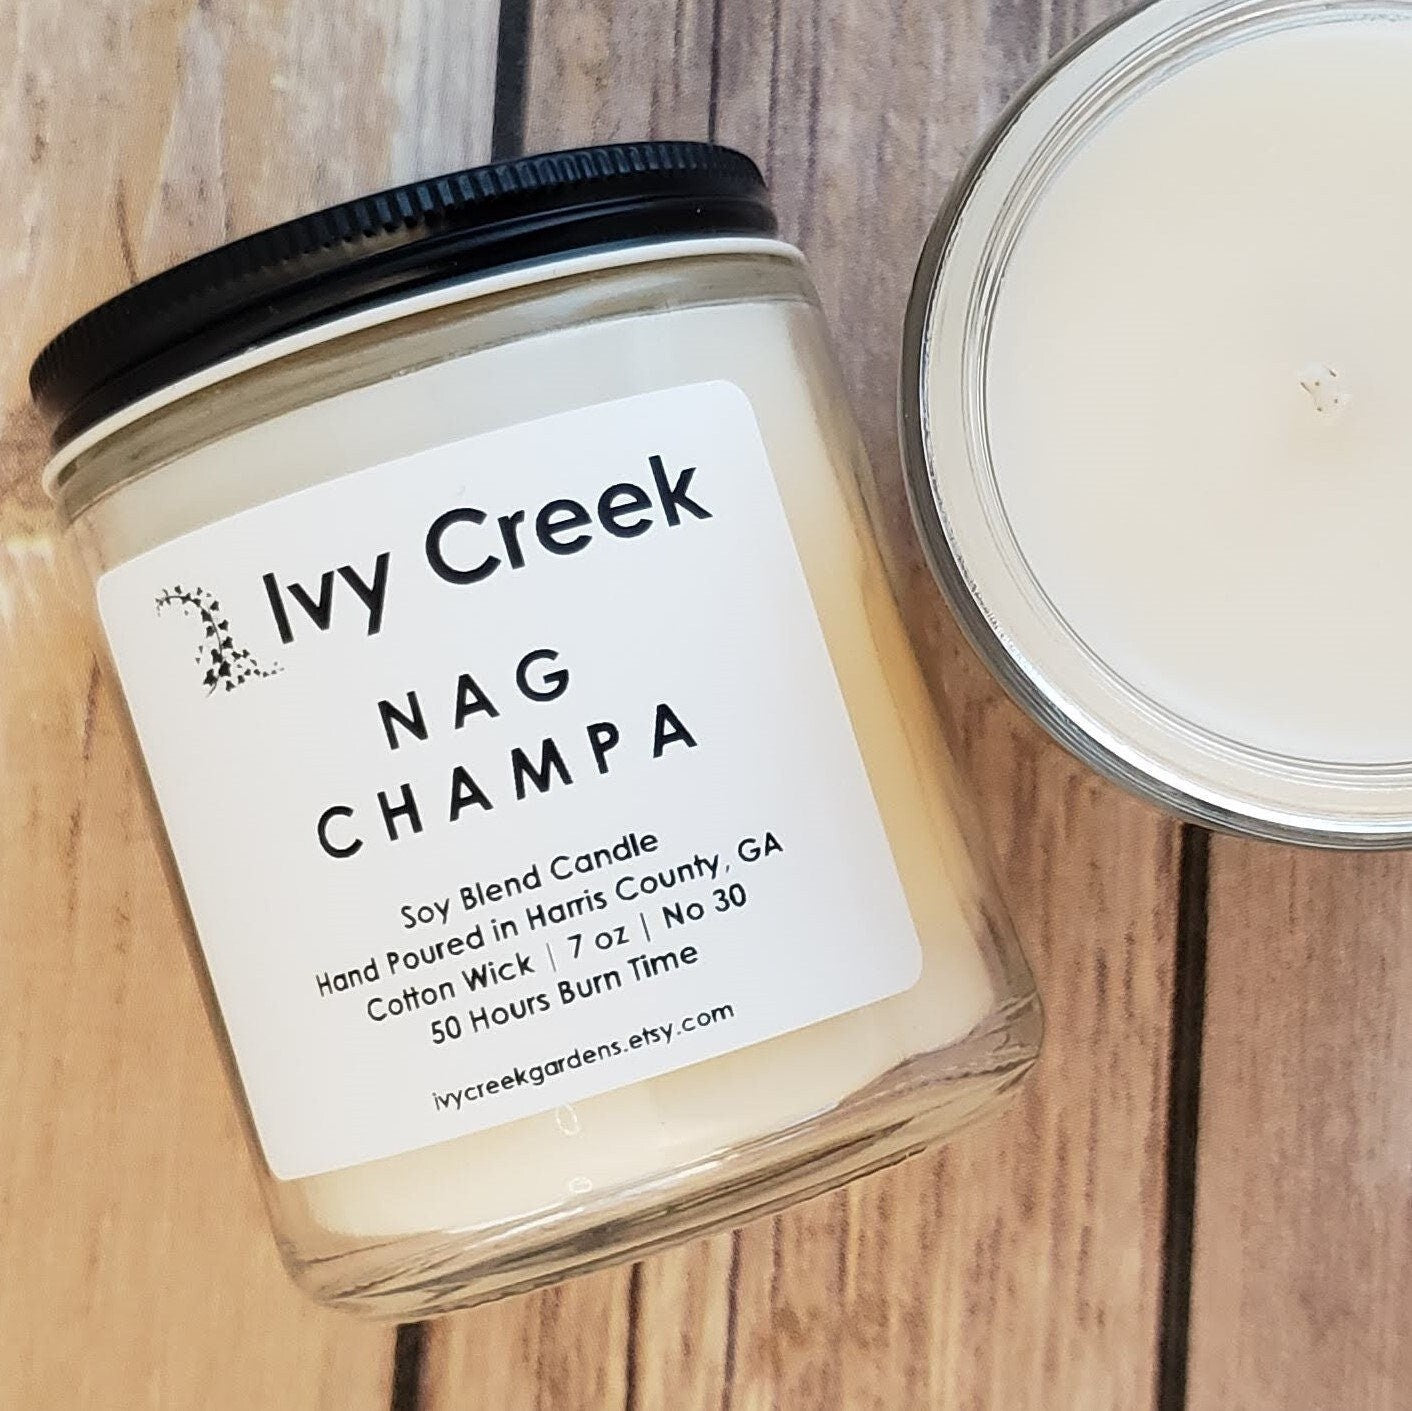 Ivy Creek No 30 | Nag Champa Exotic Aroma Soy Blend Candle | Hand Poured | 7 oz | Cotton Wick | Small Batch | Clean Burning | Container